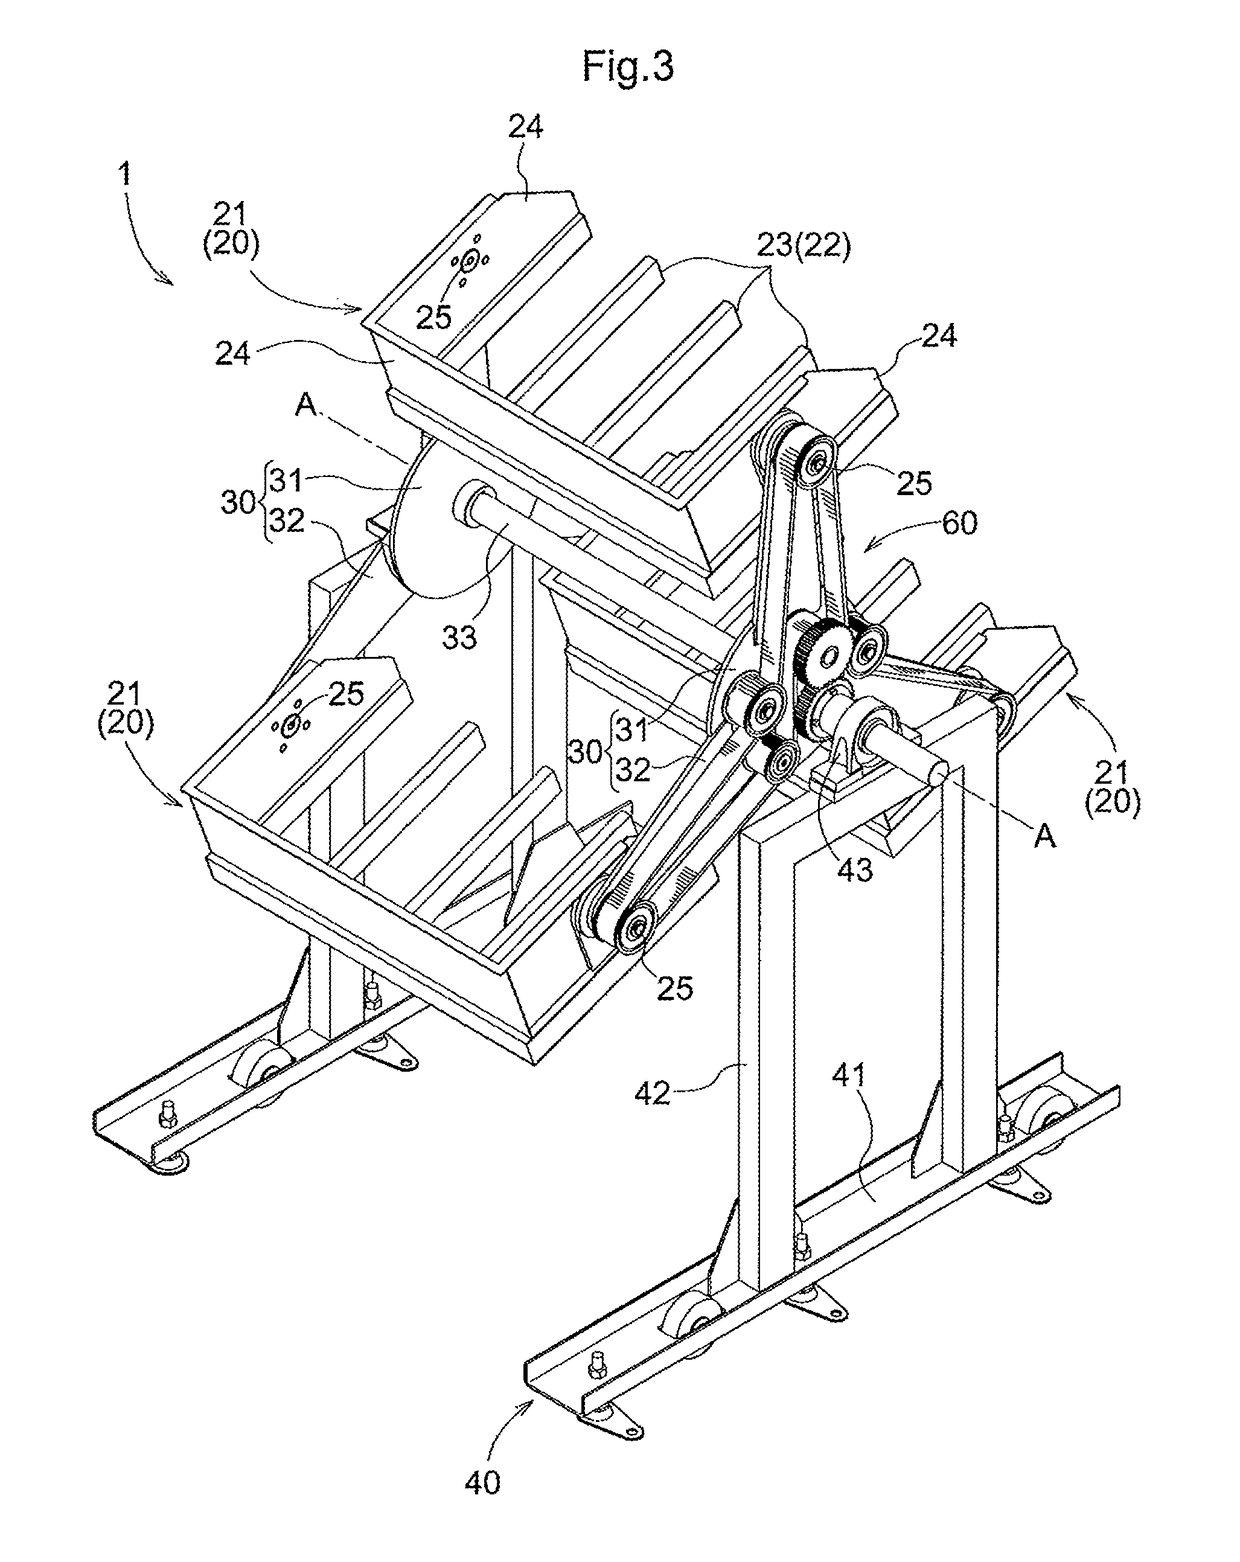 Article Transport Apparatus and Article Transport Facility